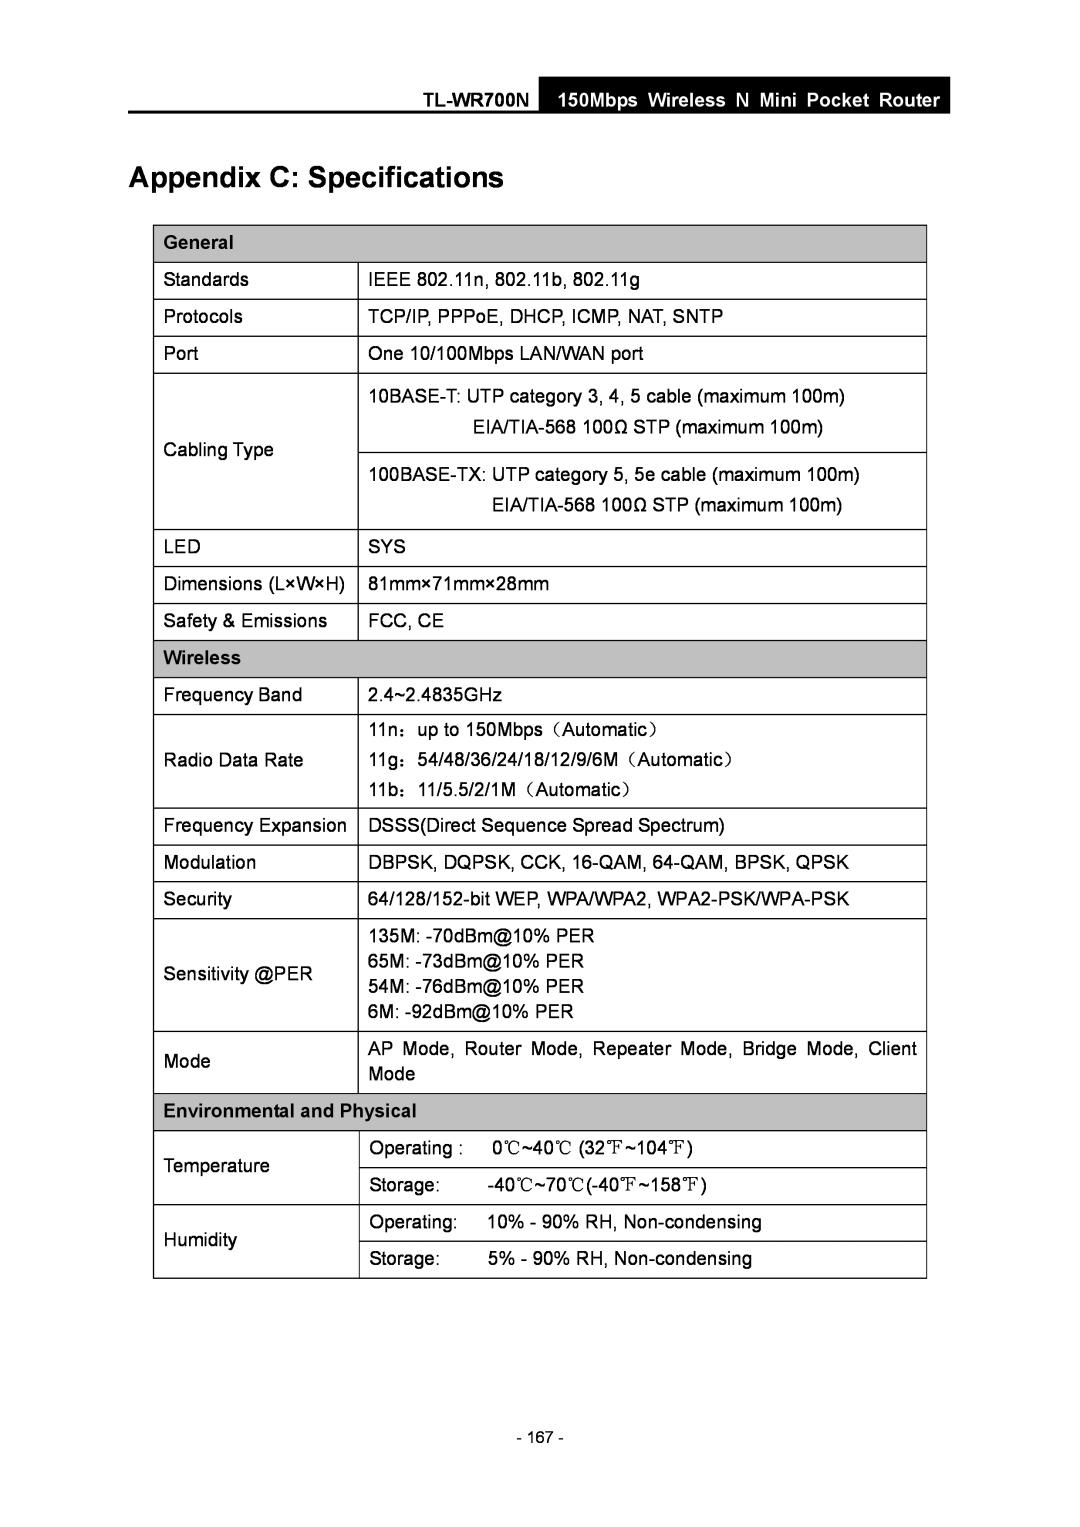 TP-Link TL-WR700N manual Appendix C Specifications, General, Wireless, Environmental and Physical 